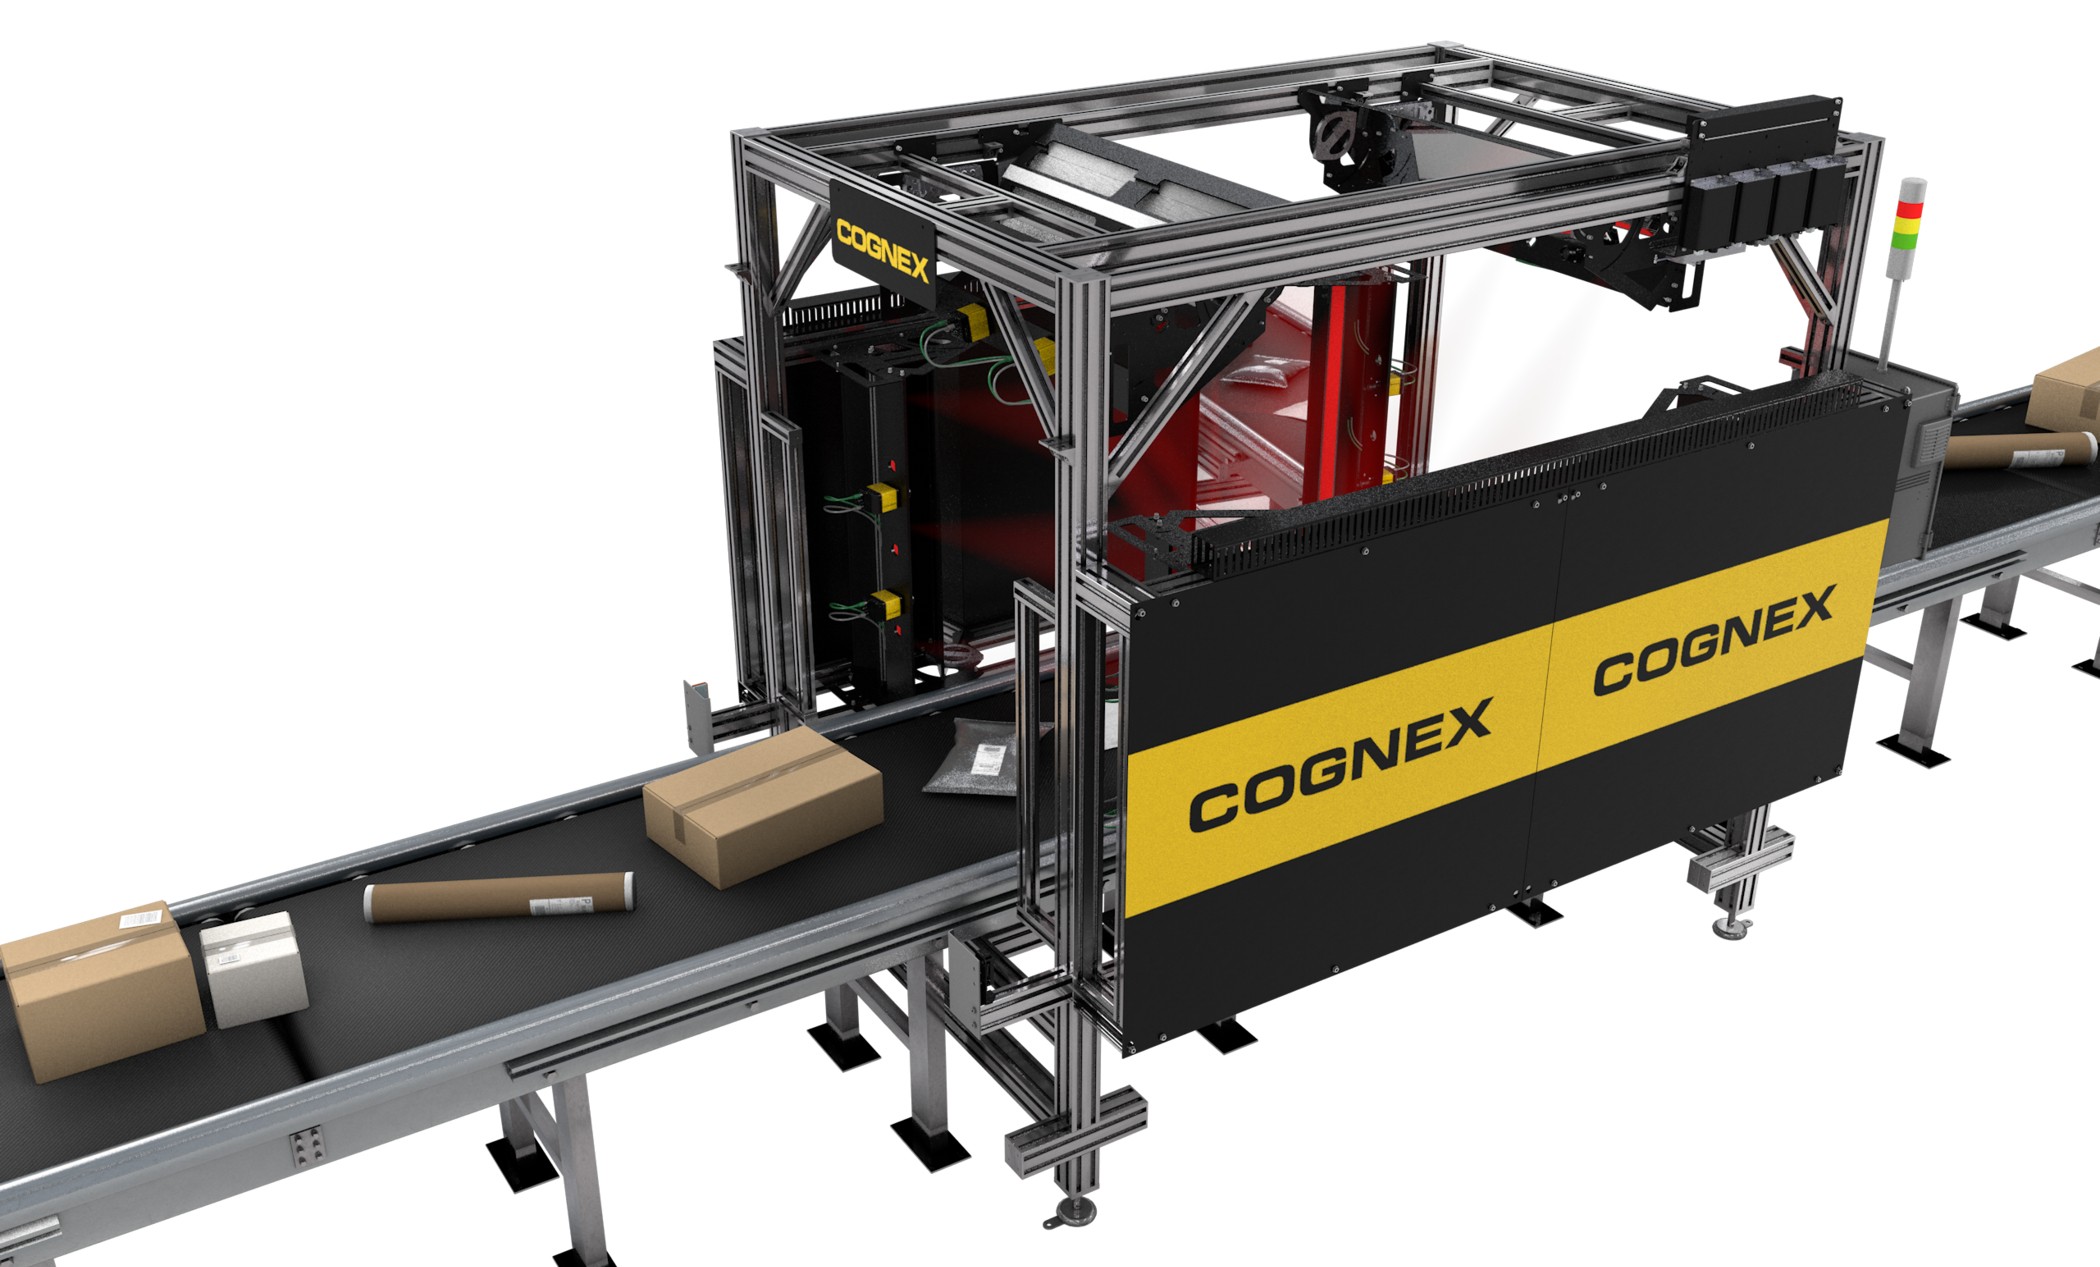 Cognex 5-sided tunnel